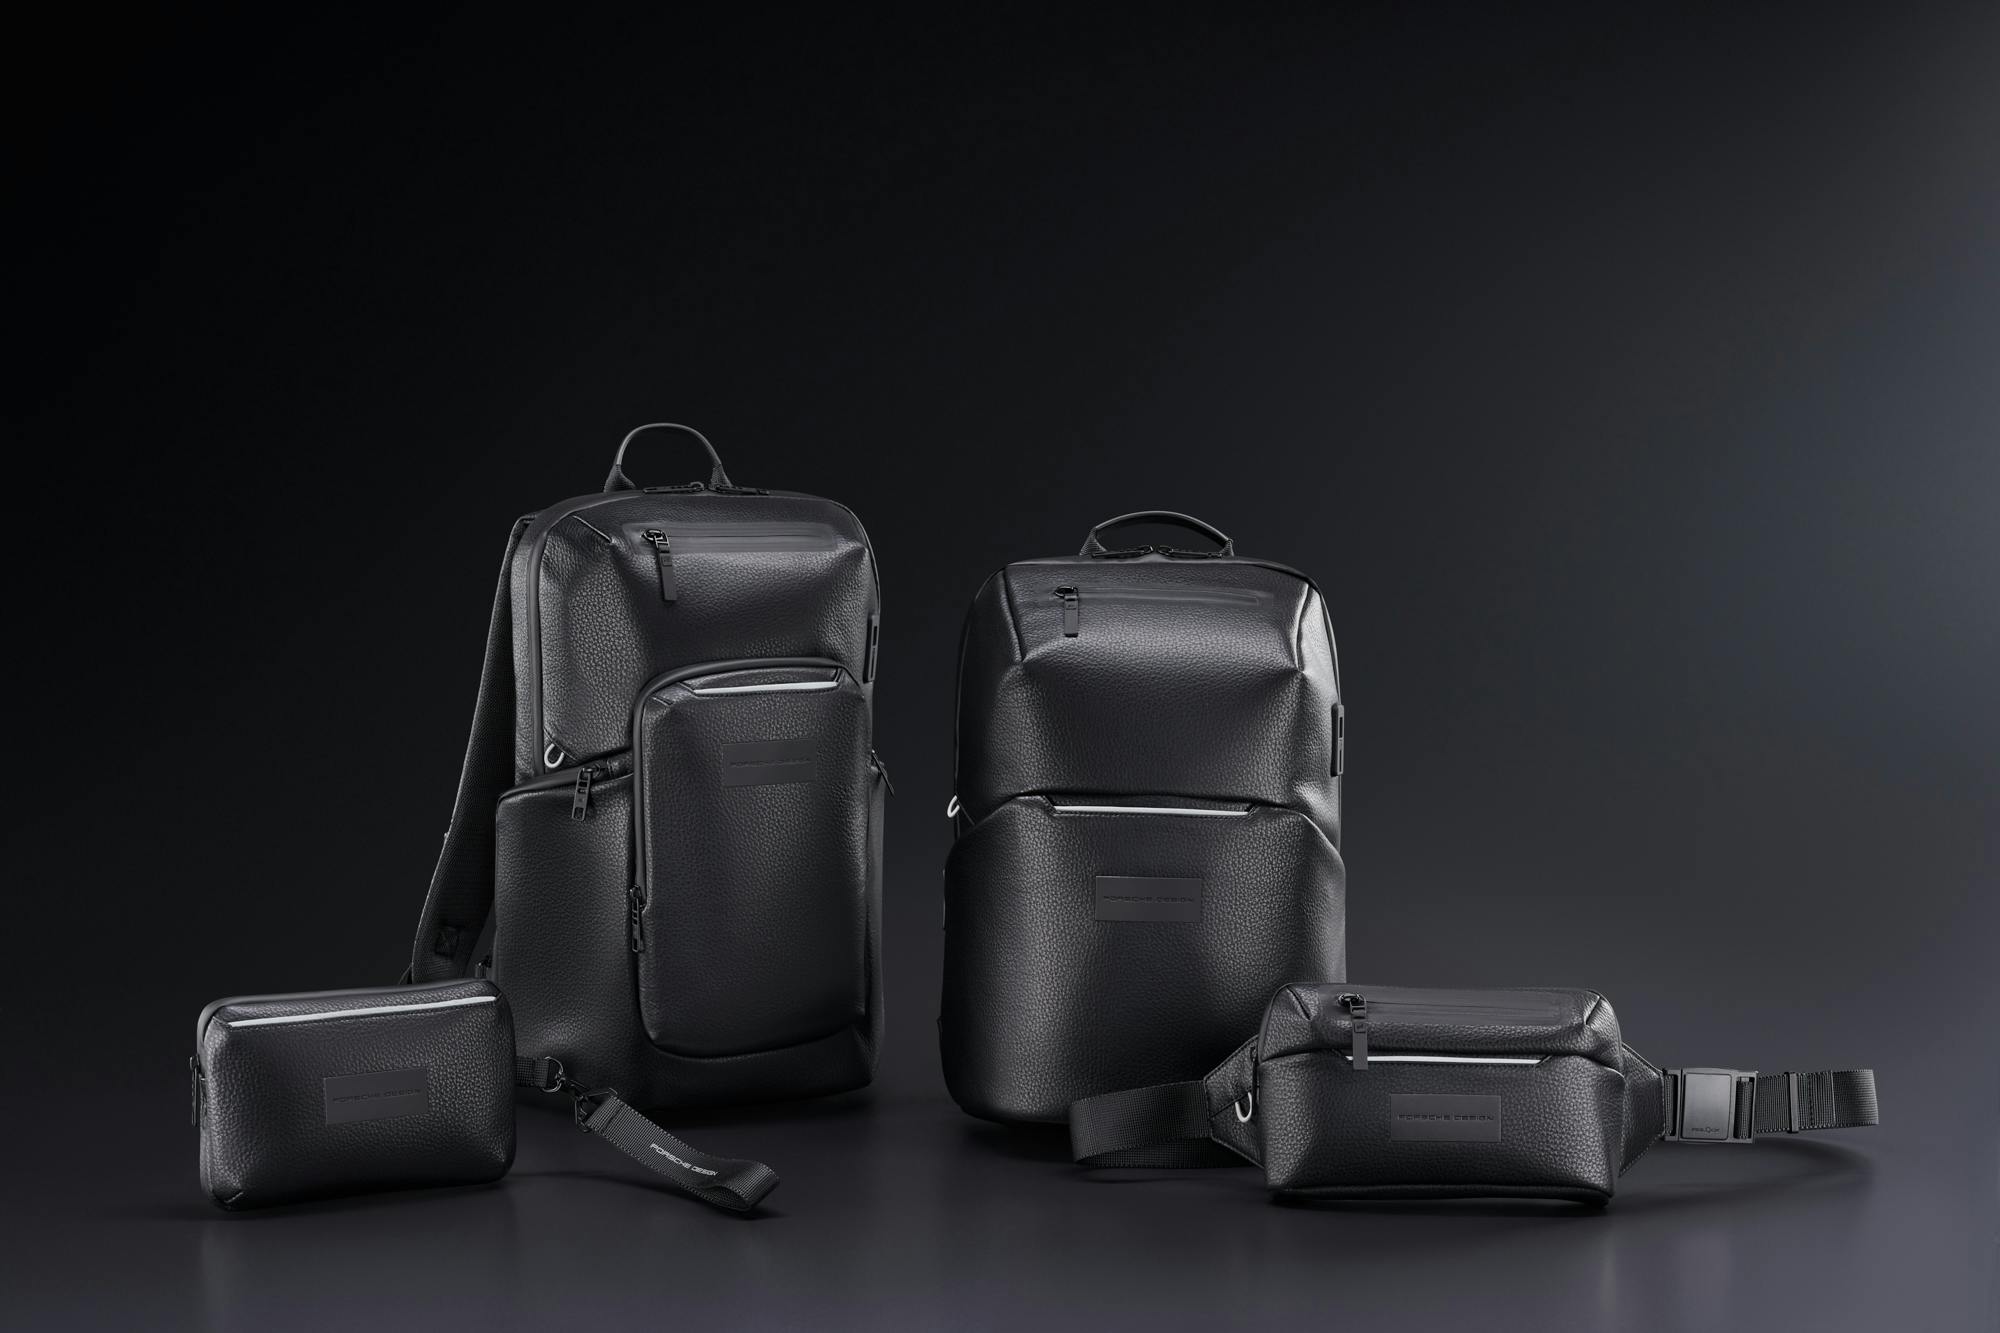 Luggage Collection with a Conscience